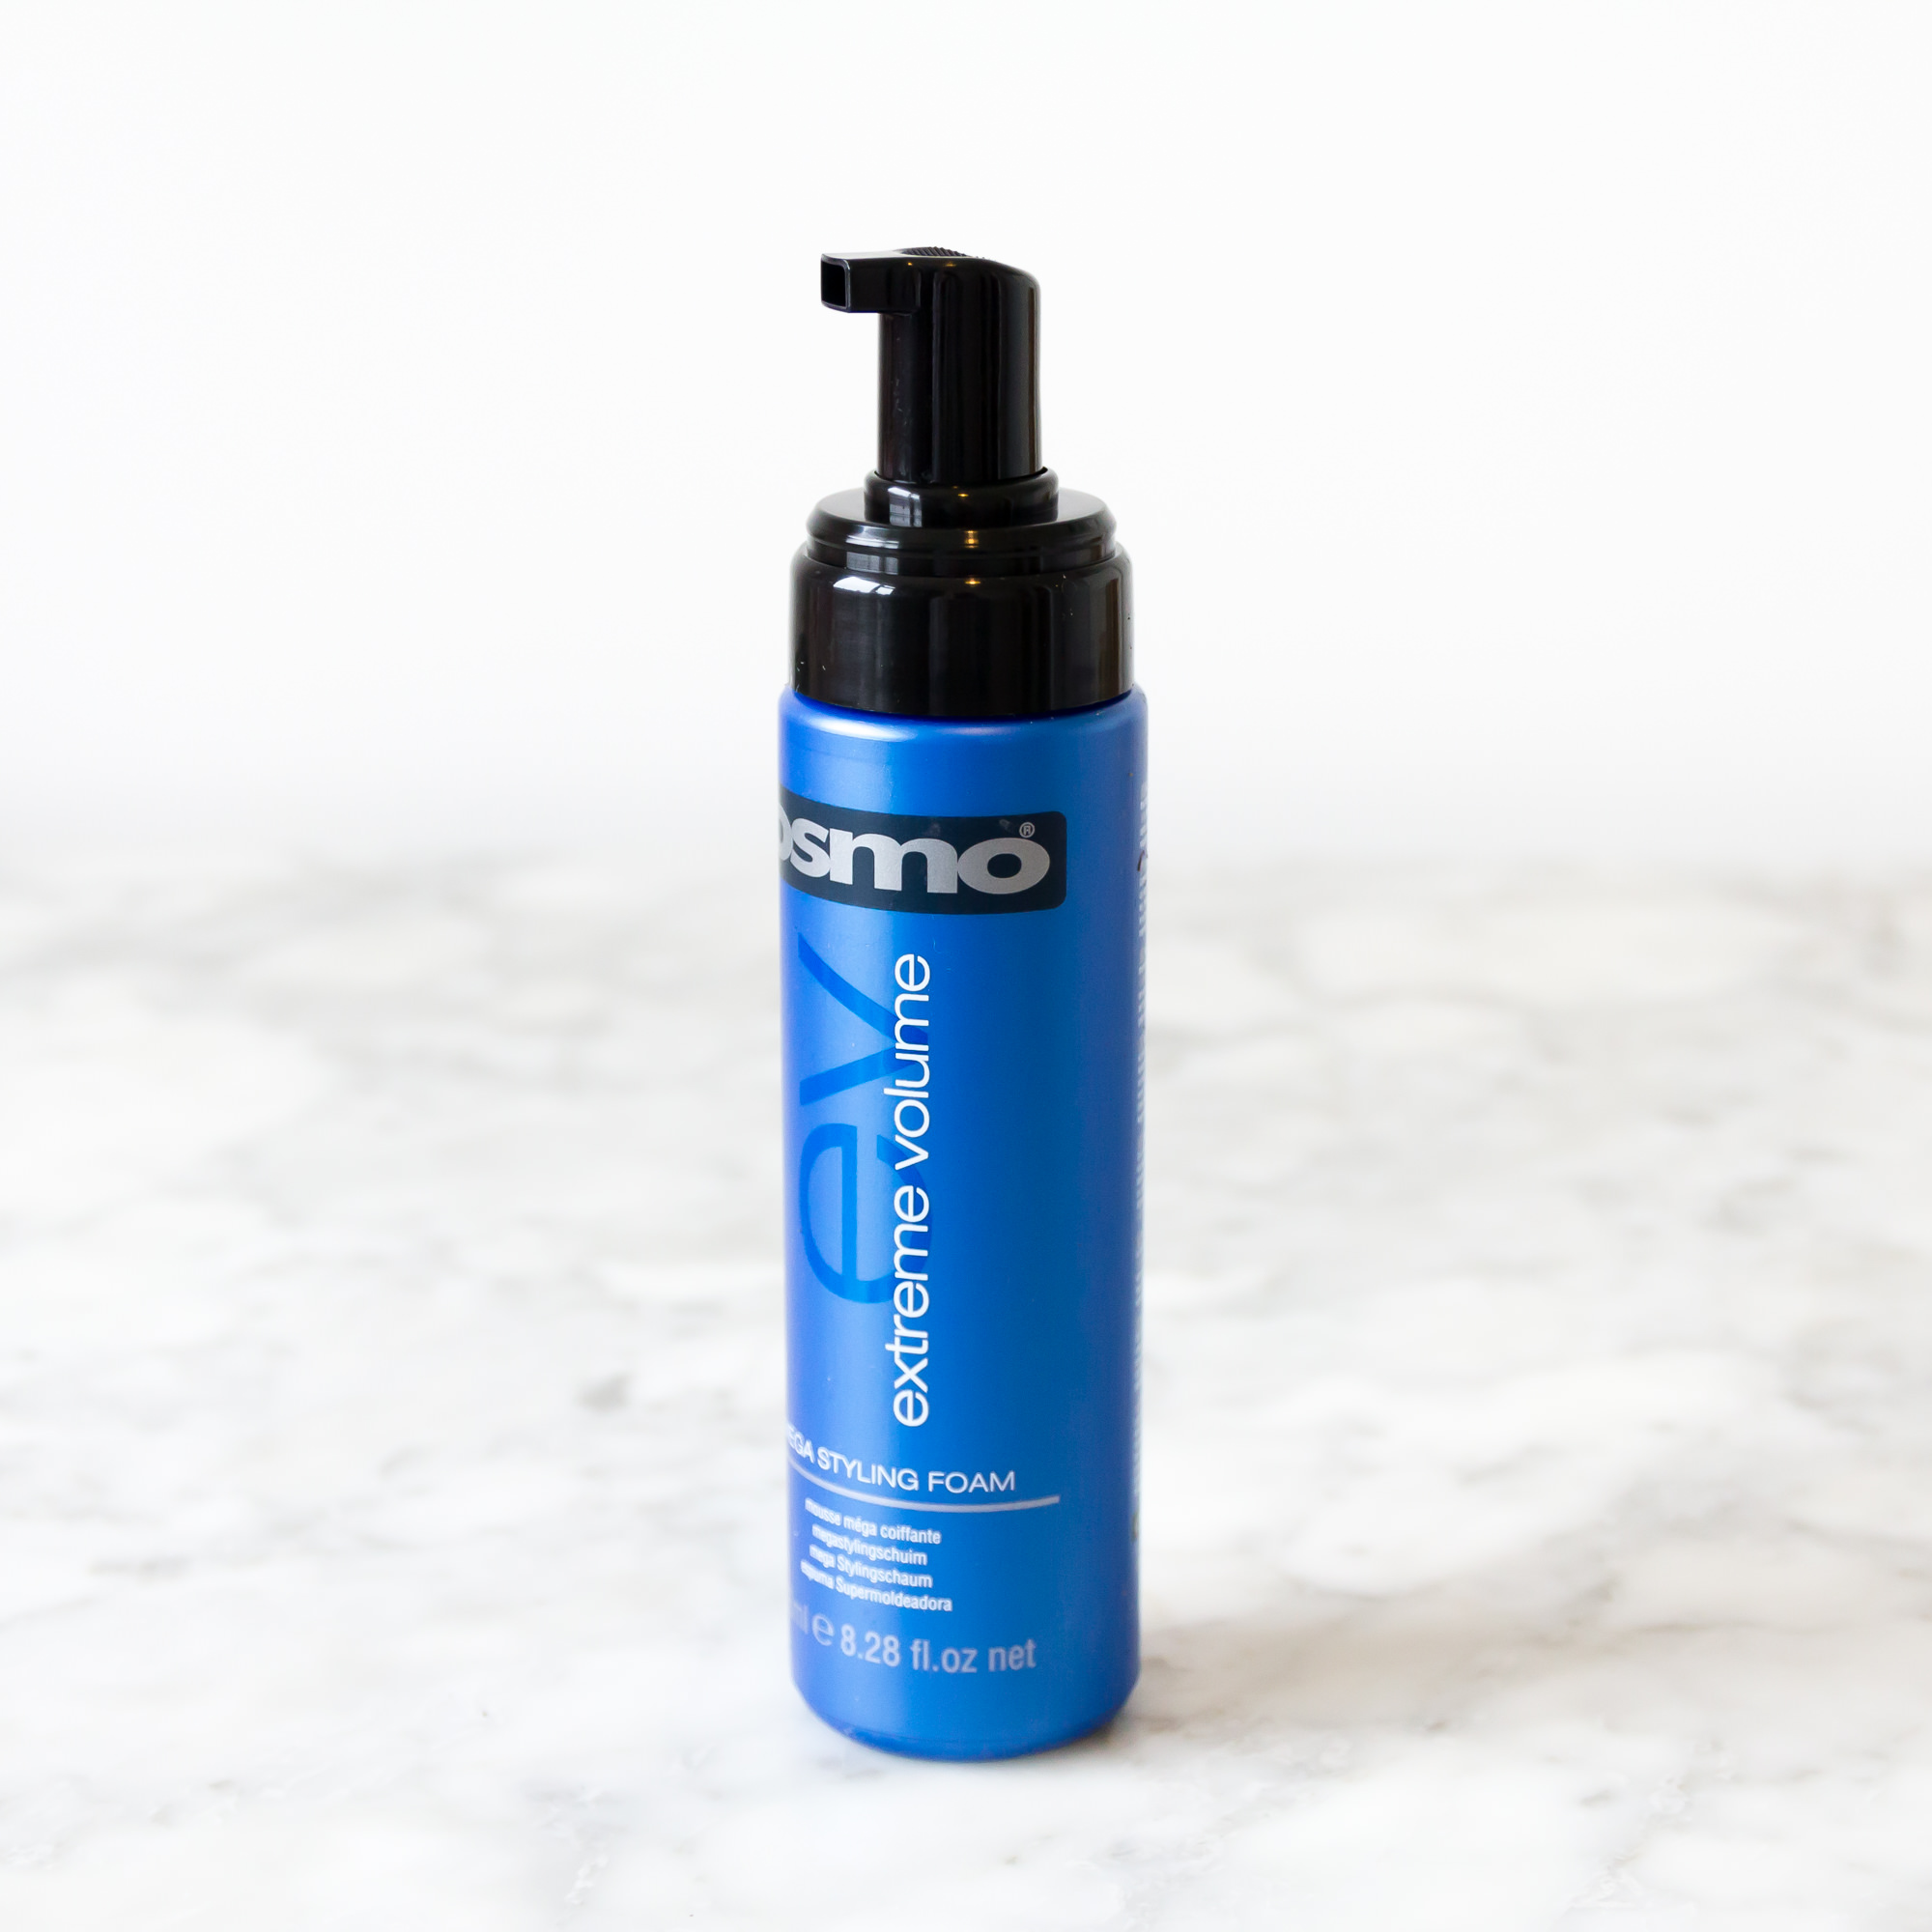 How to use hair mousse - Osmo Cosmetics - Strikeapose